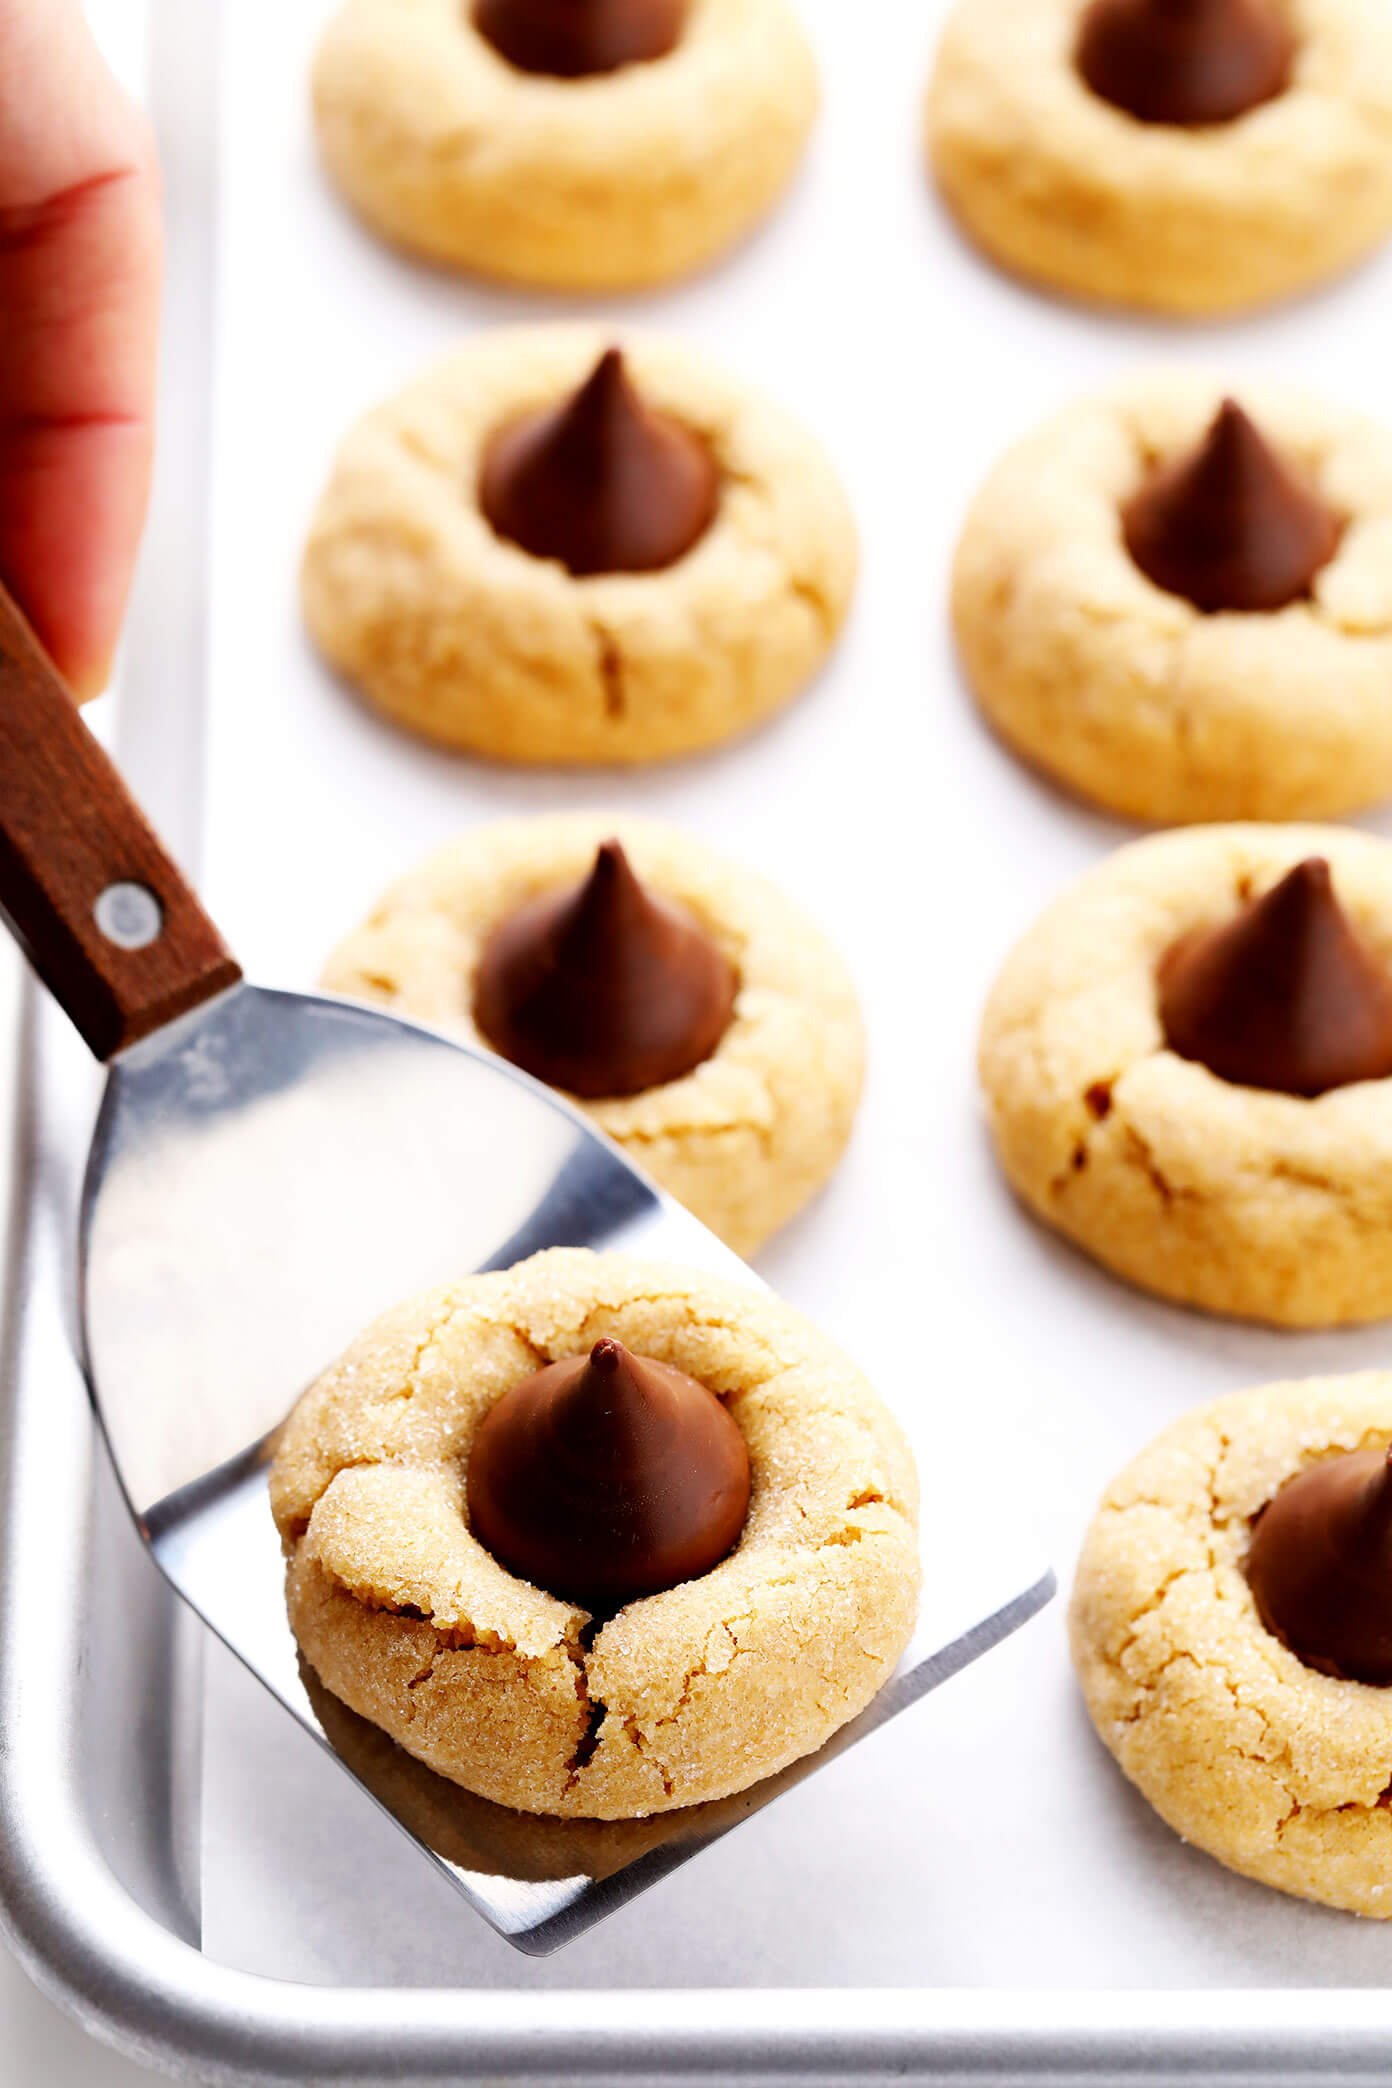 Peanut Butter Blossoms (Hershey's Kiss Cookies)